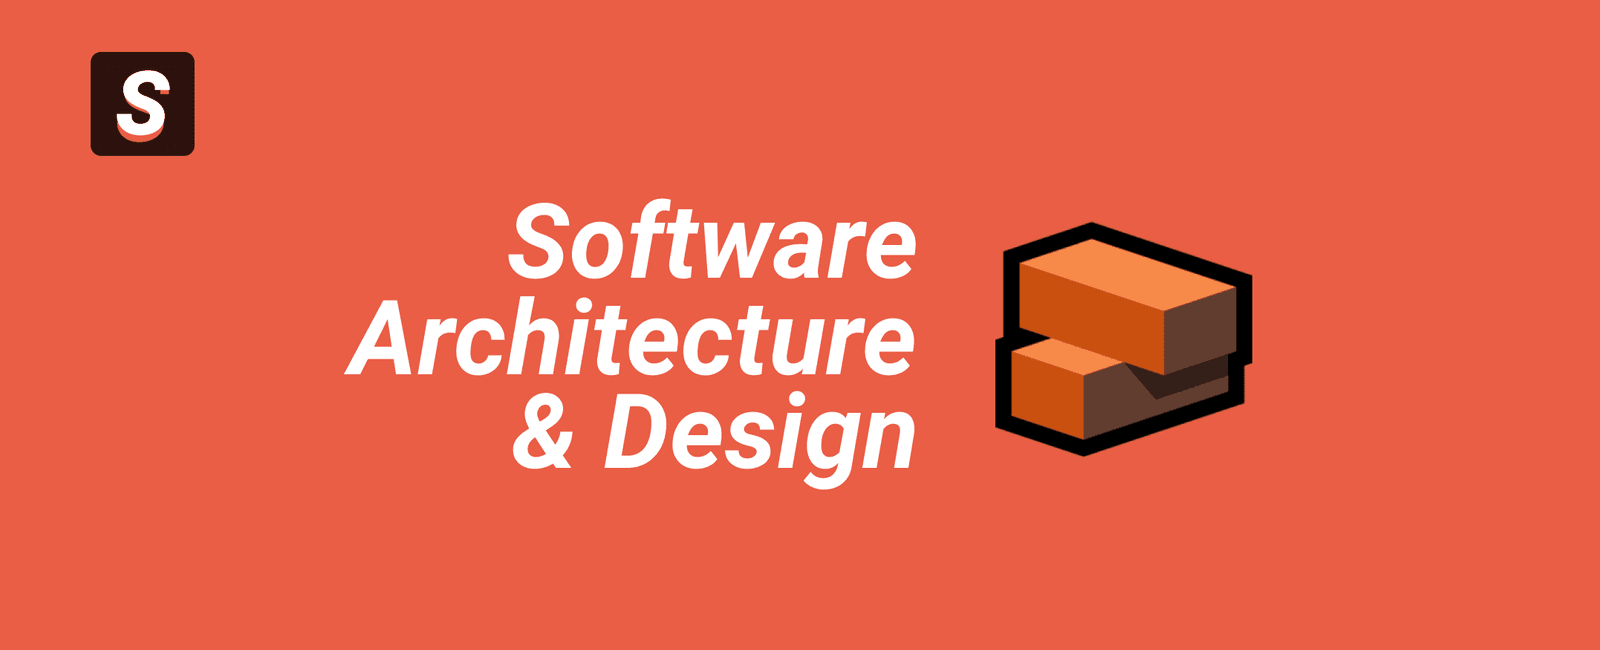 10 Professional Tips on Designing Software Architecture | Vegavid